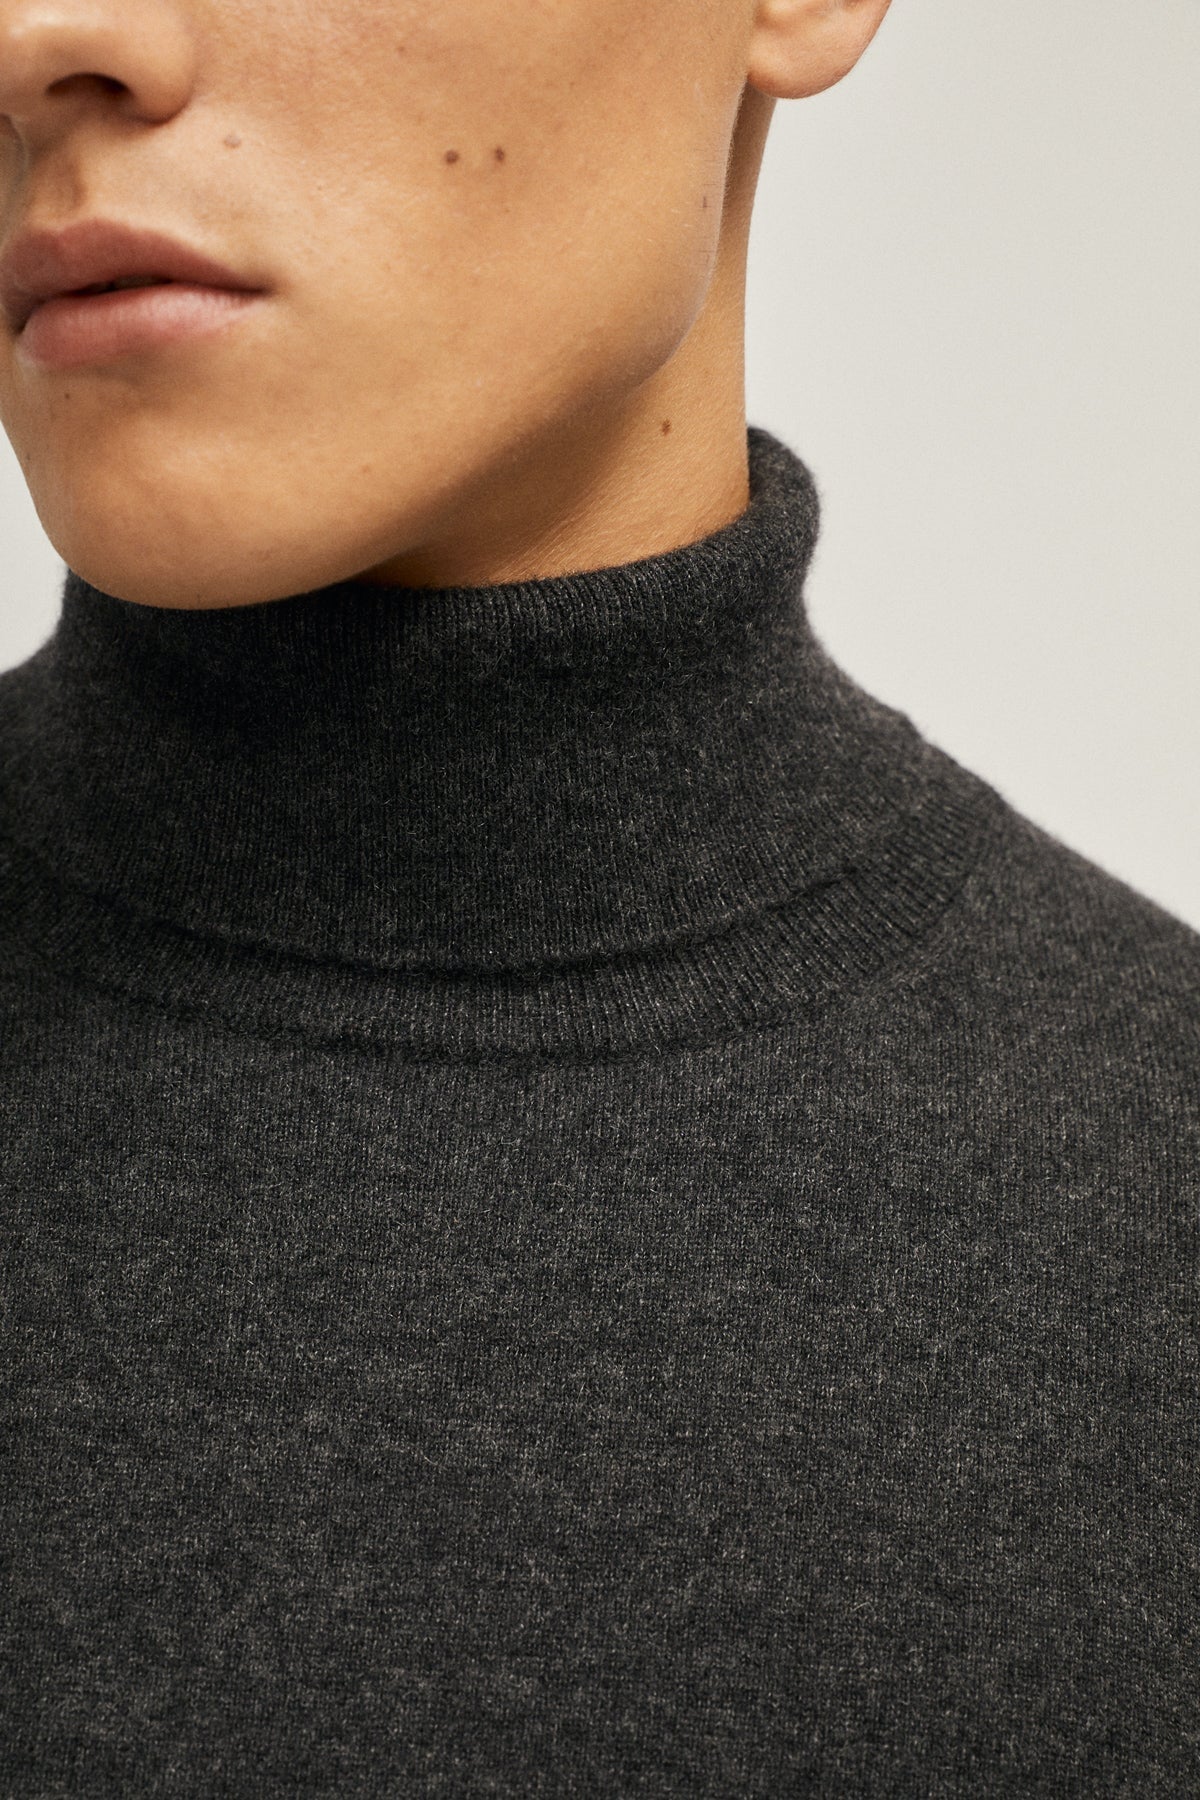 Charcoal Grey | The Cashmere Roll-Neck